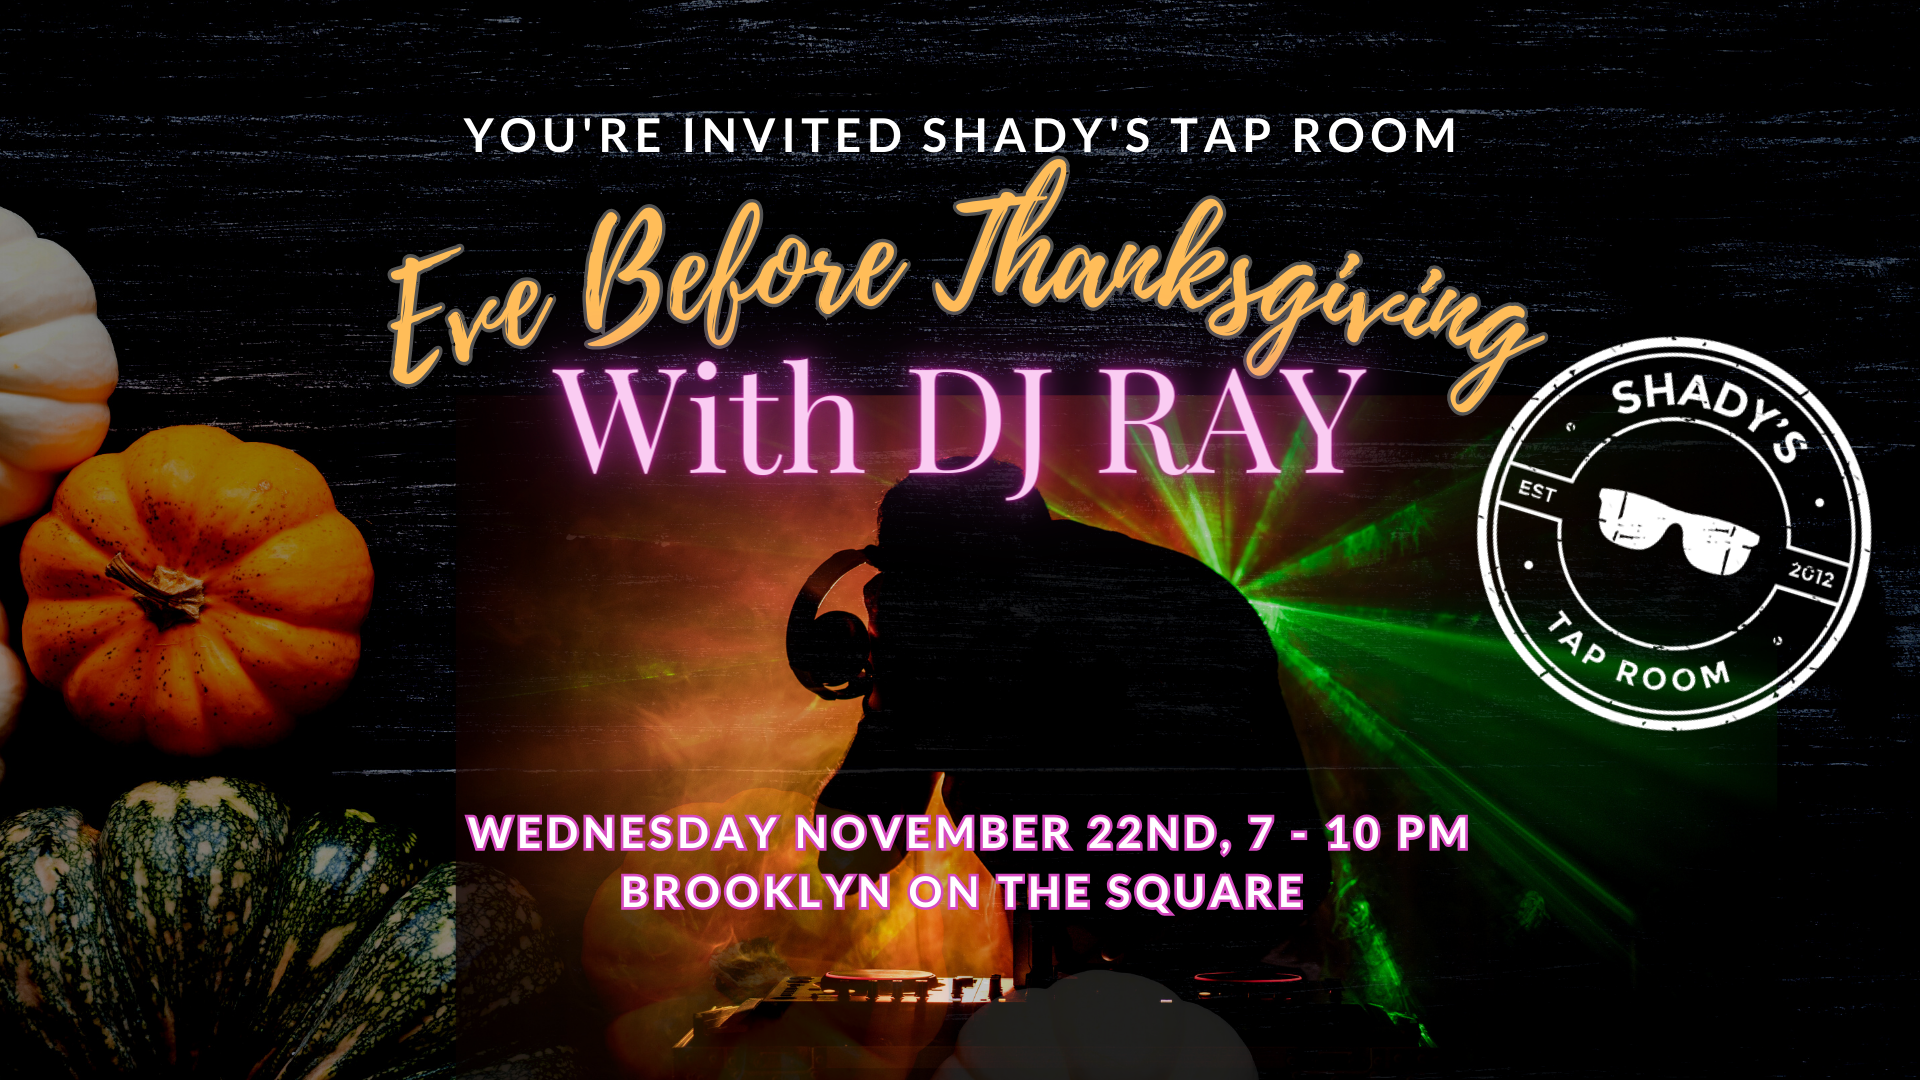 DJ Ray at Shady's Eve Before Thanksgiving